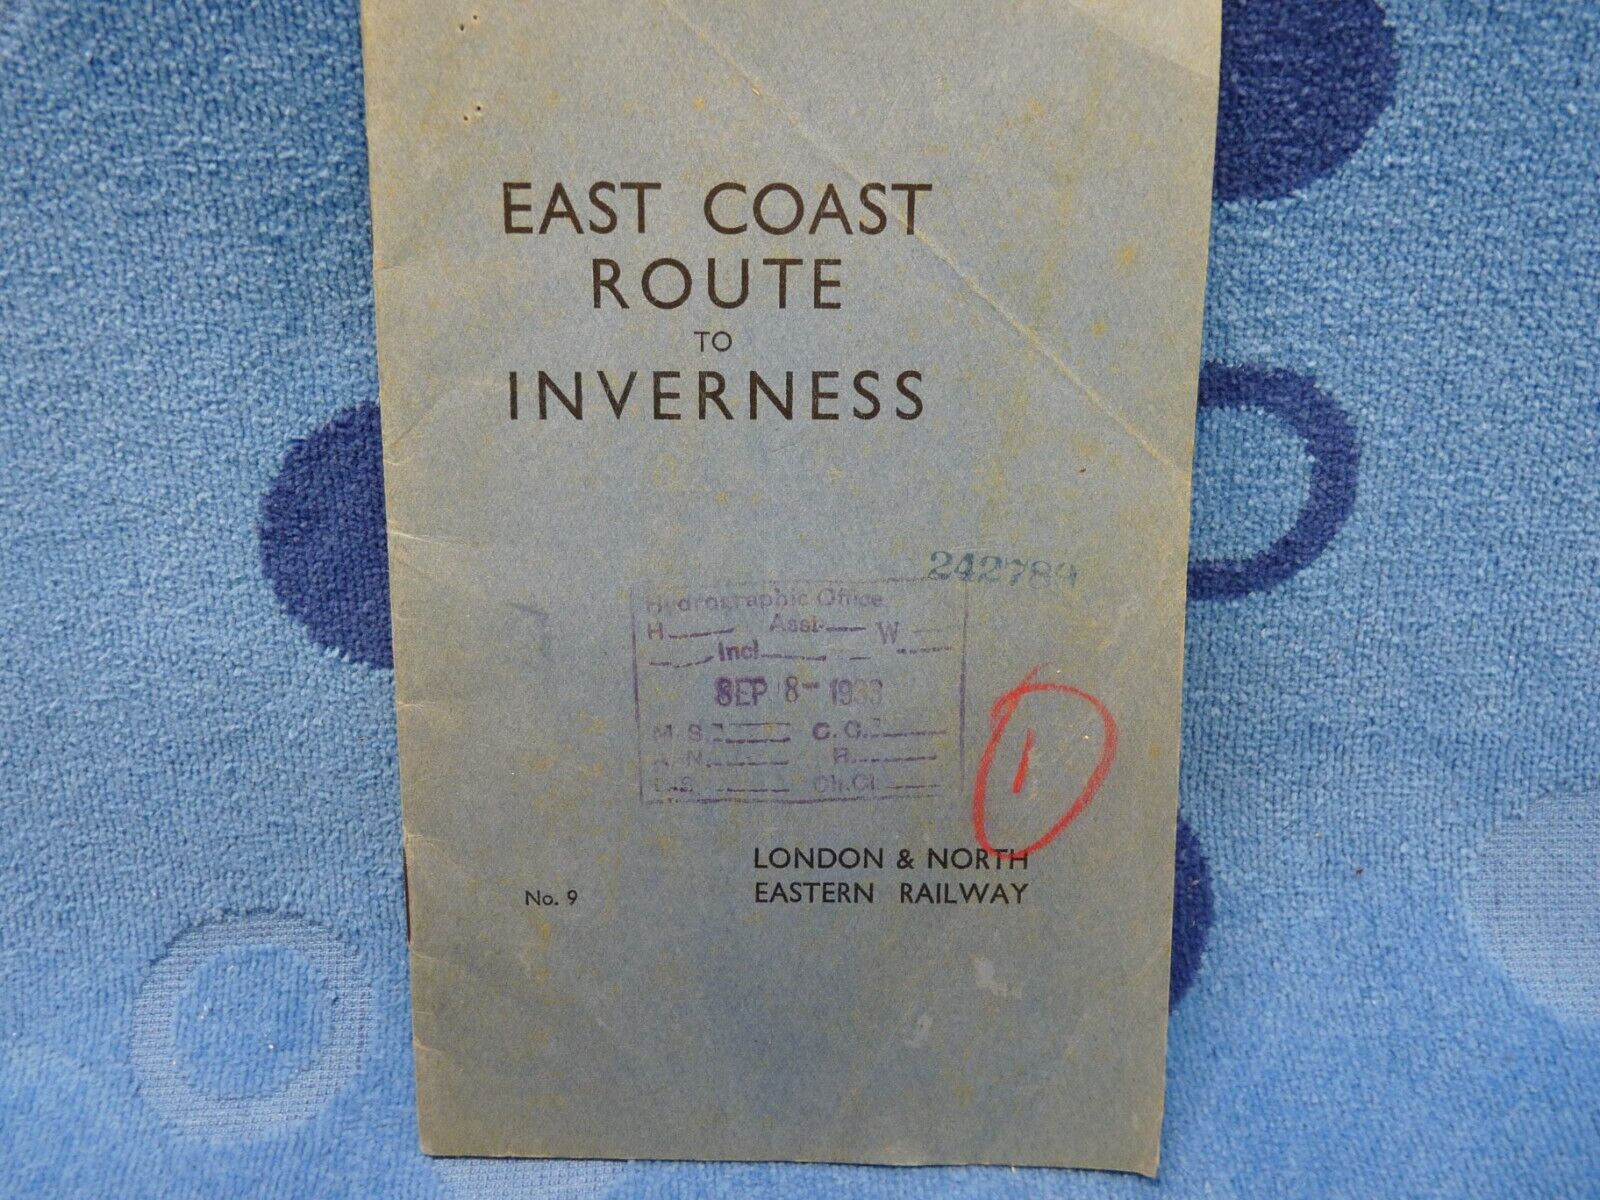 London & North Eastern Railway 1933 Travel Guide East Coast Route to Inverness